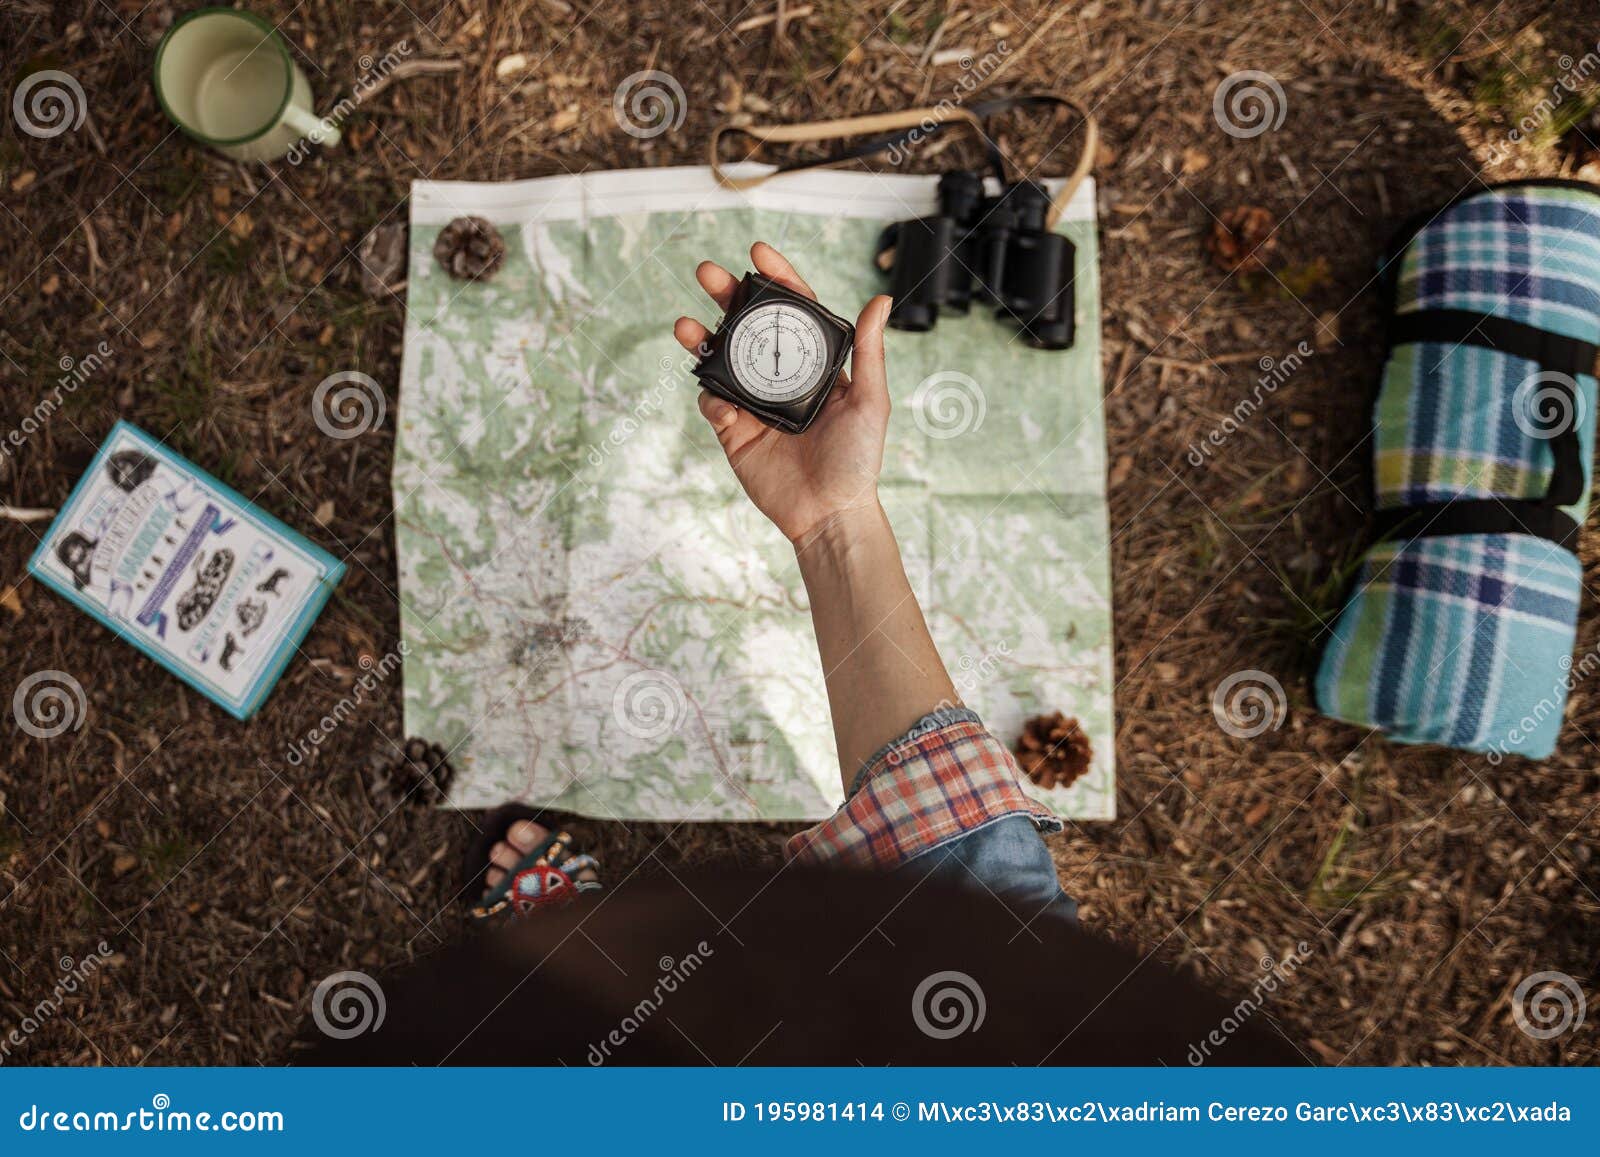 a girl is holding a compass to orientate in the forest with a map.